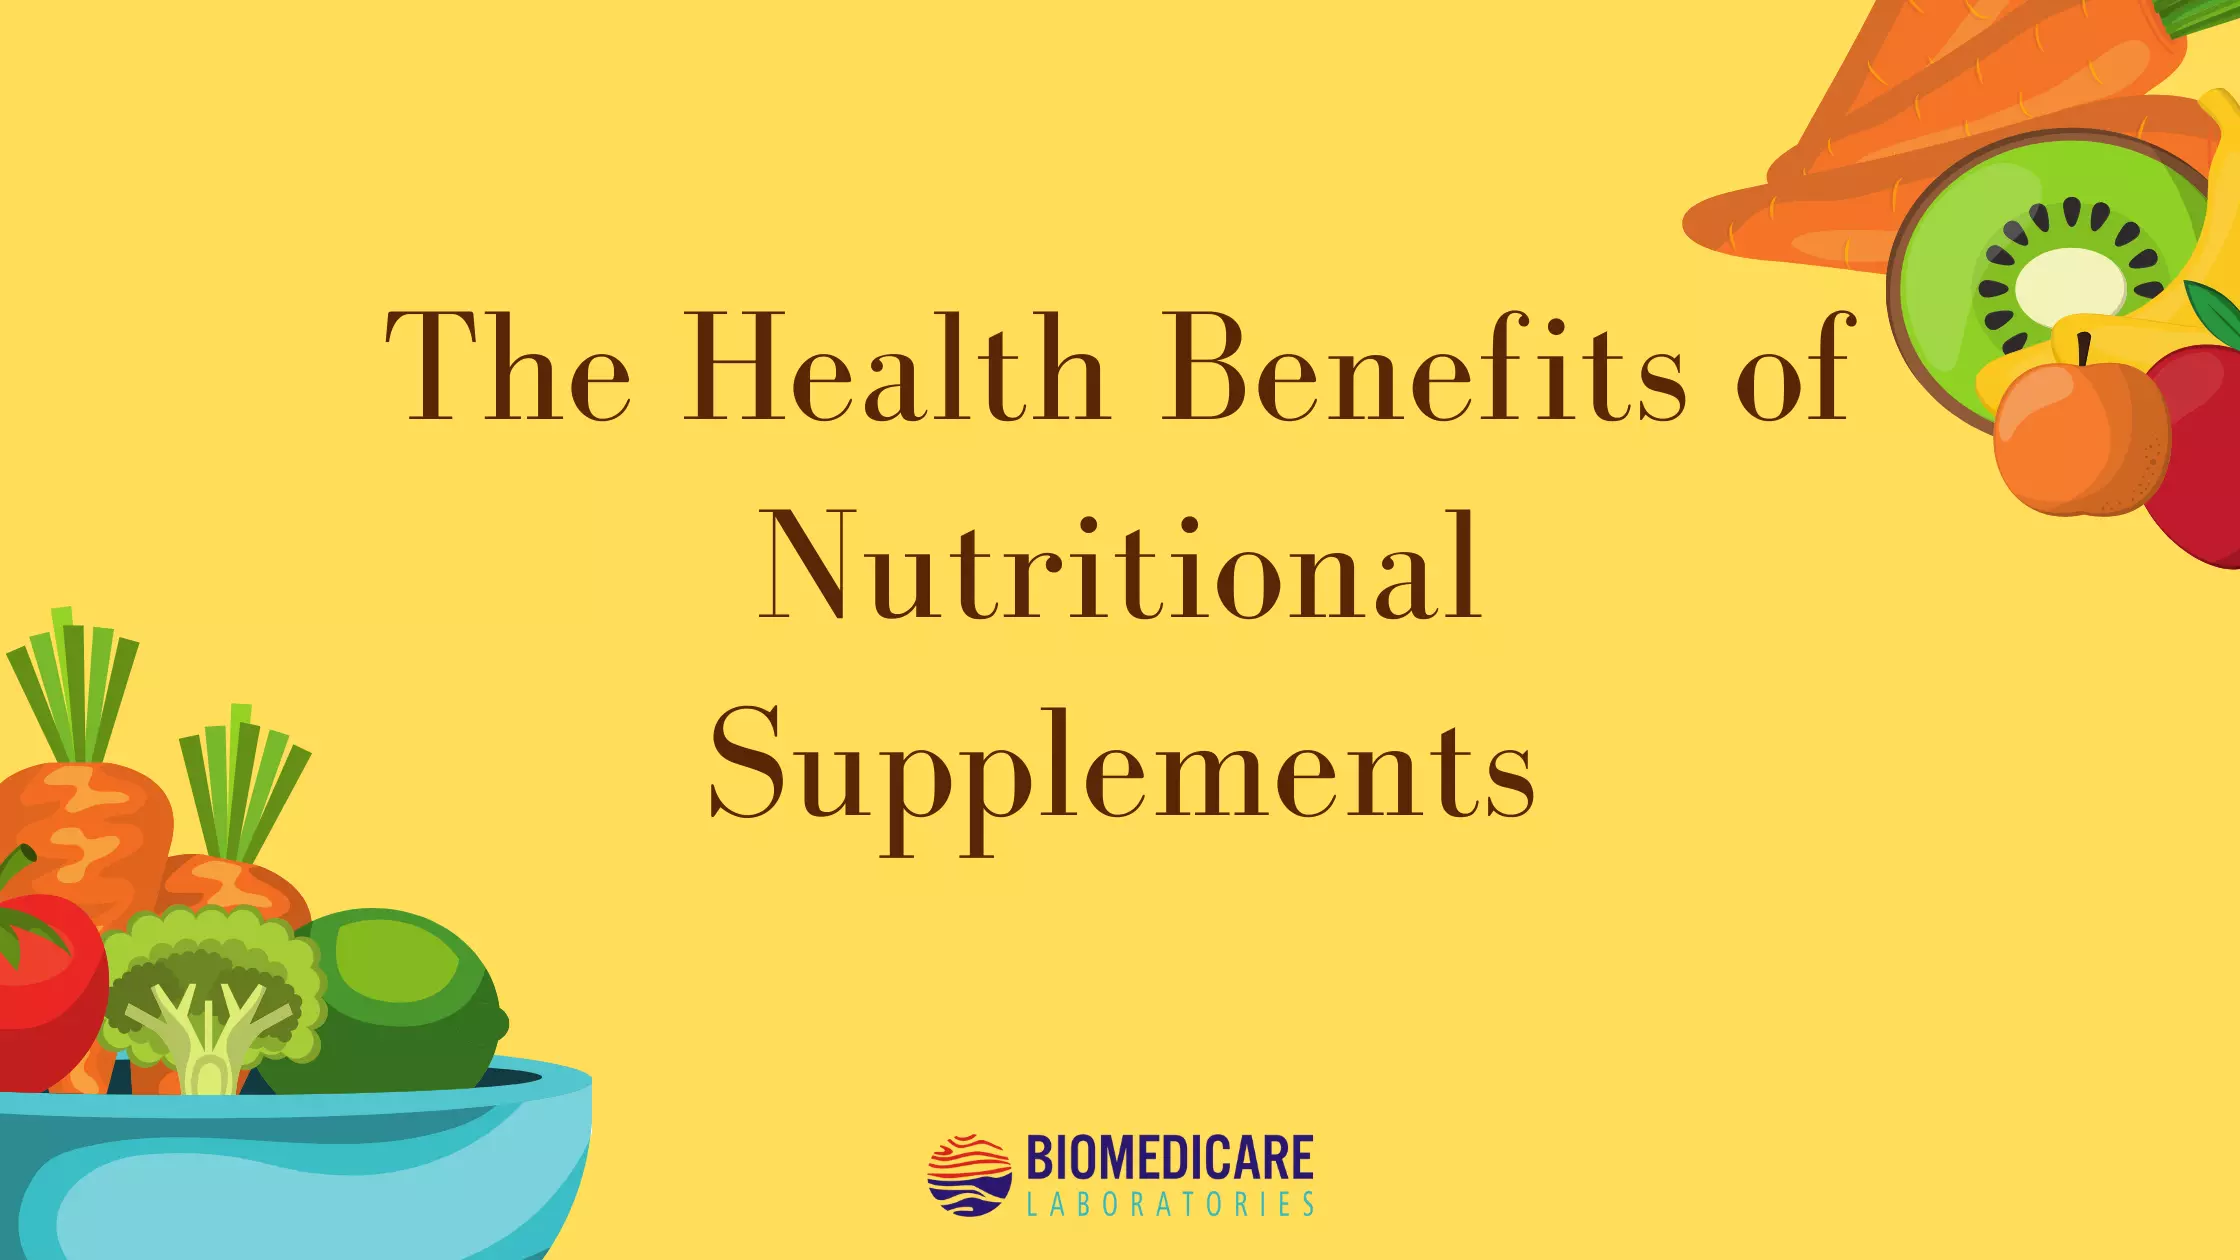 The Health Benefits of Nutritional Supplements